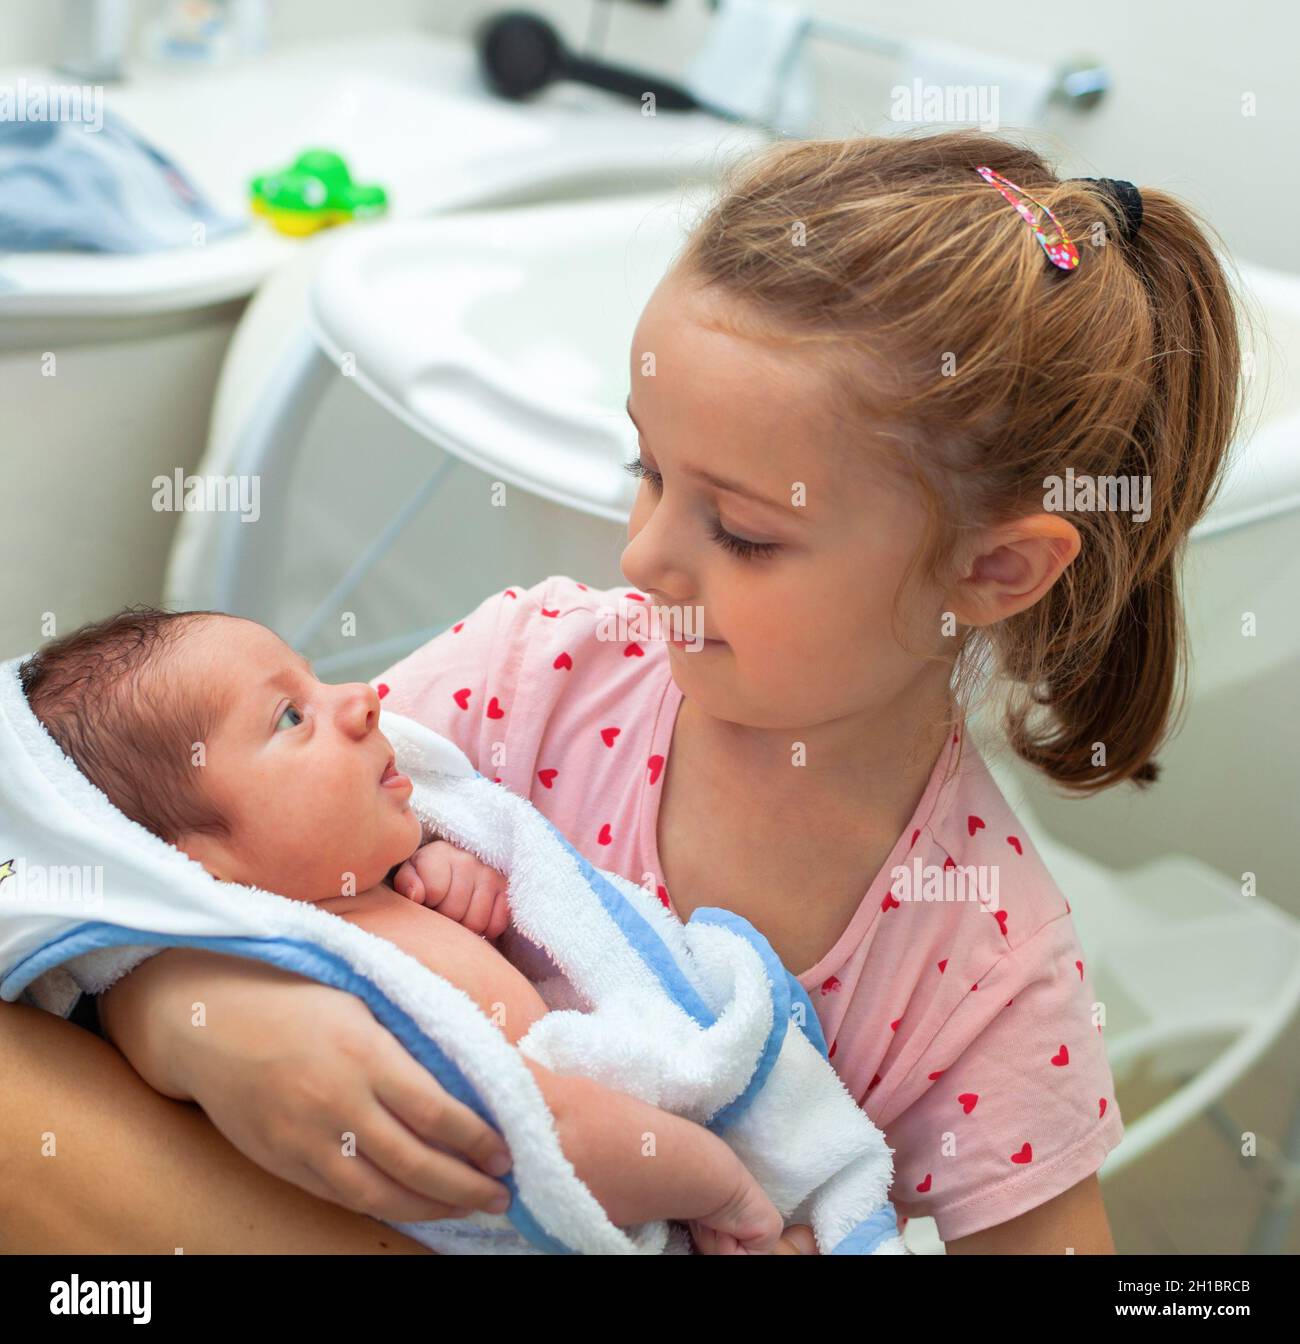 First bath of newborn baby boy. The baby is in the bathrobe in the arms of his little sister. Stock Photo